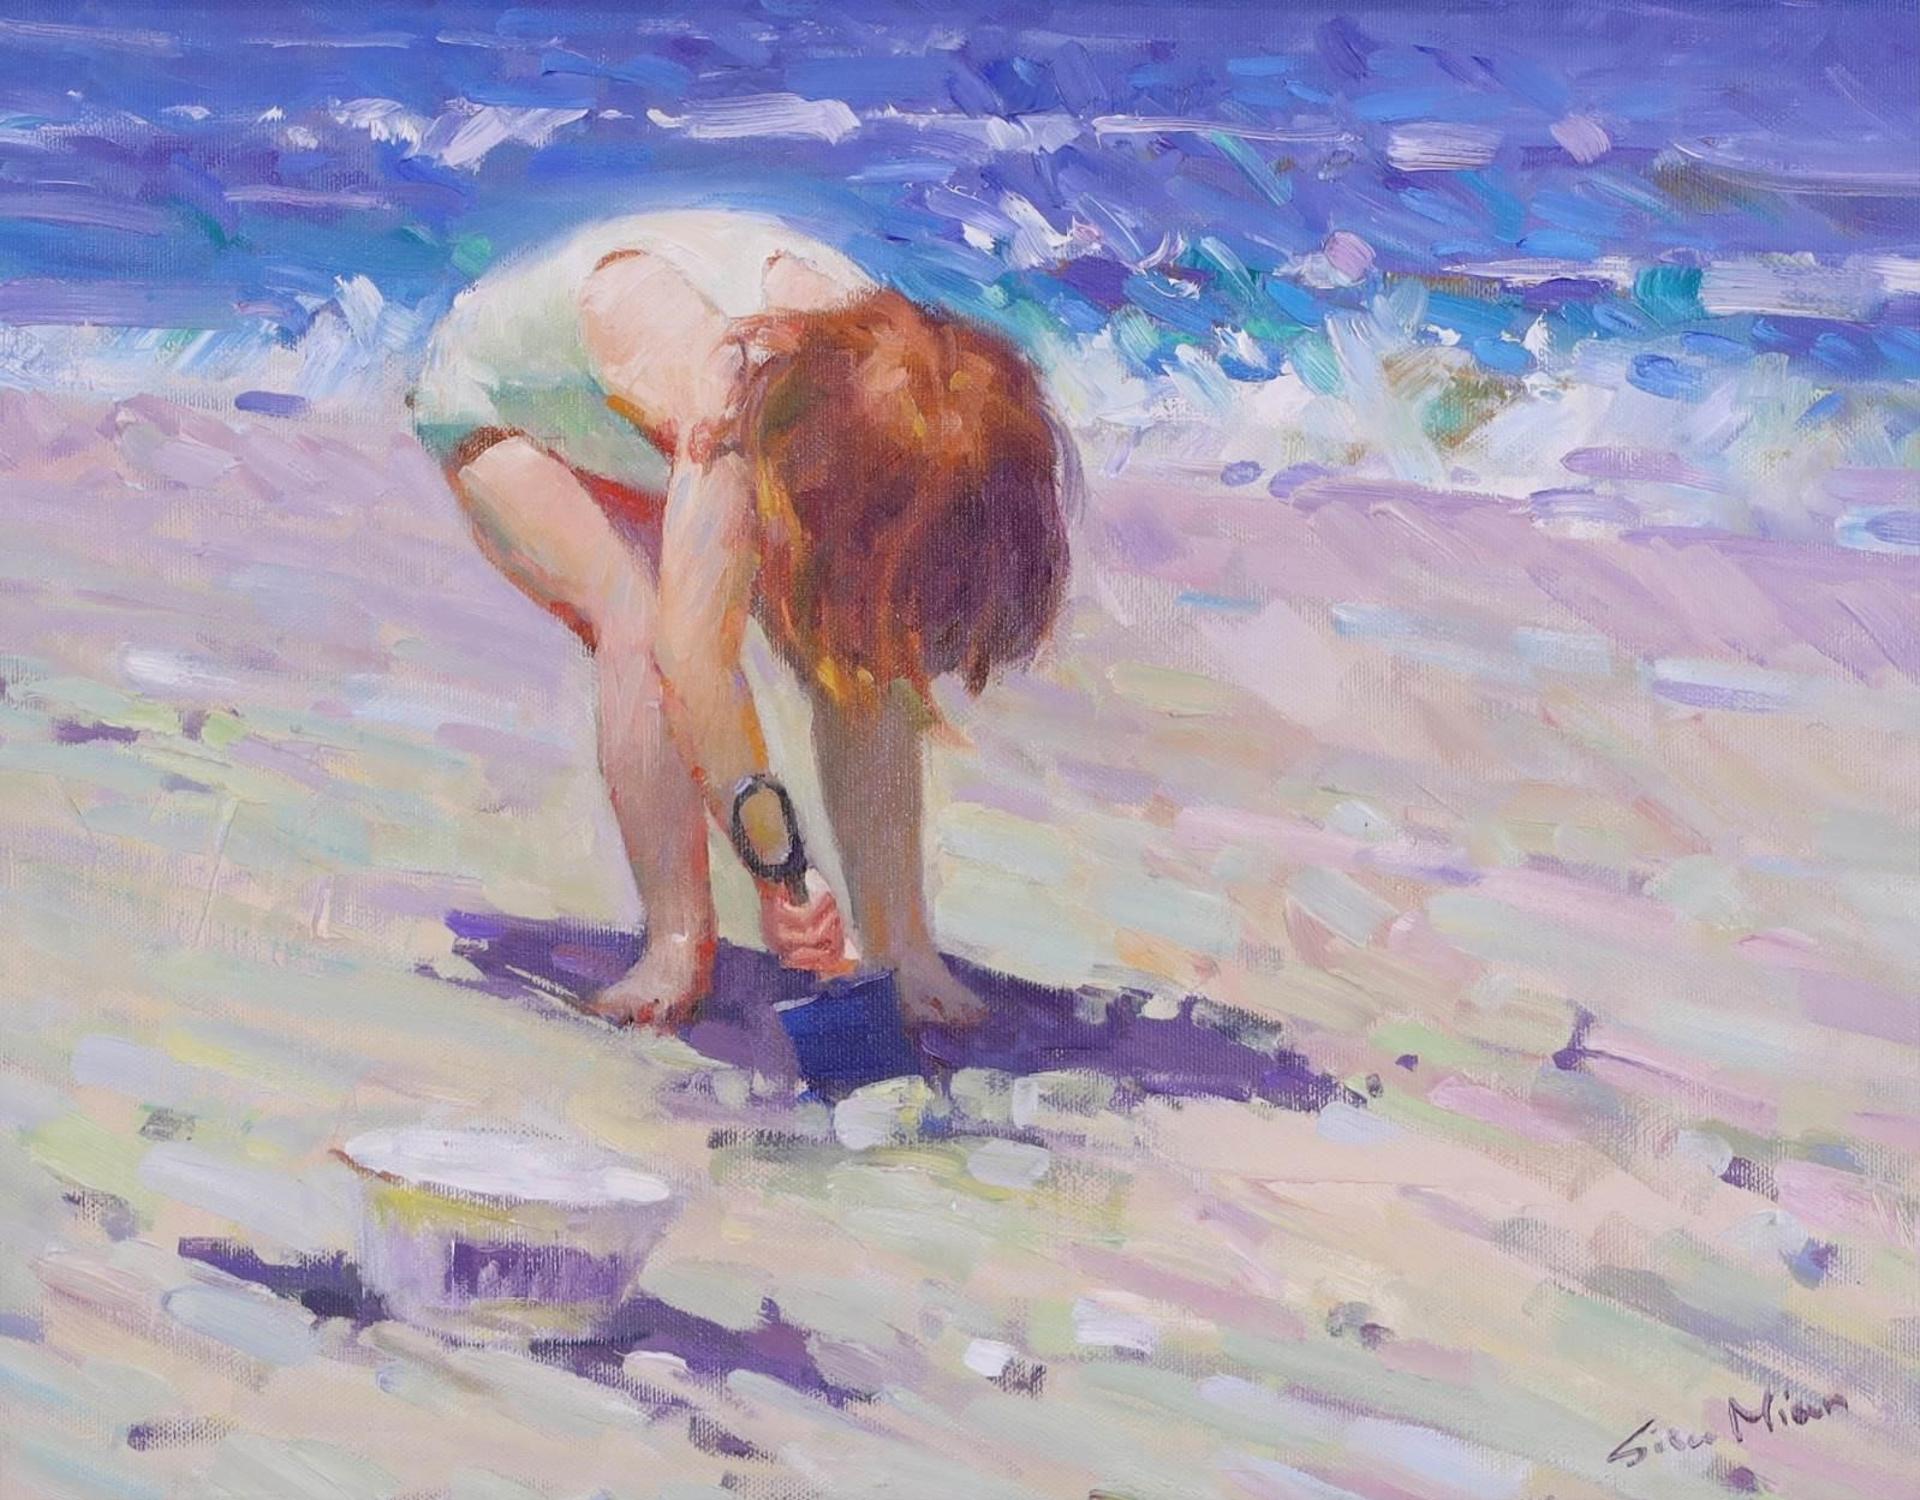 Mian Situ (1953) - Beach Scene - Girl With Sand Pail And Shovel